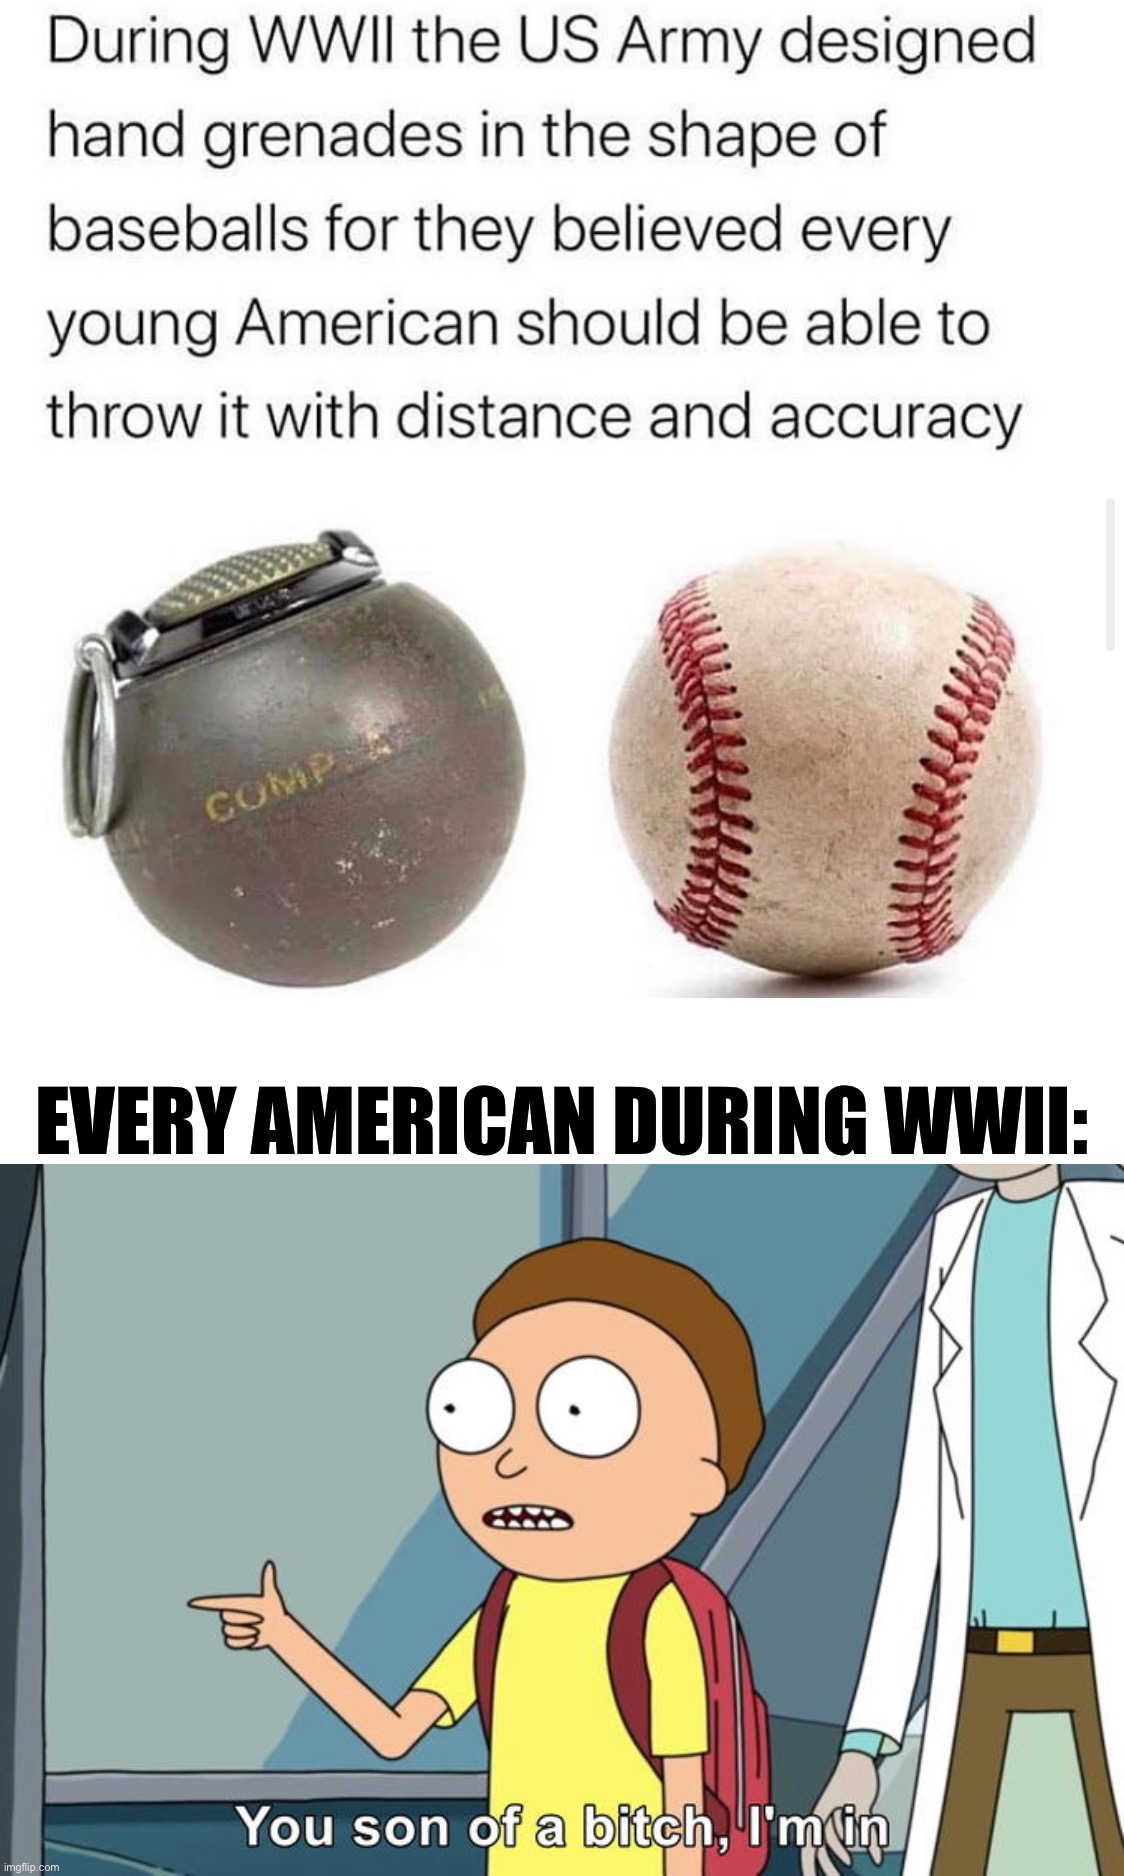 EVERY AMERICAN DURING WWII: | image tagged in morty i'm in,funny,memes,historical meme,dank memes,funny memes | made w/ Imgflip meme maker